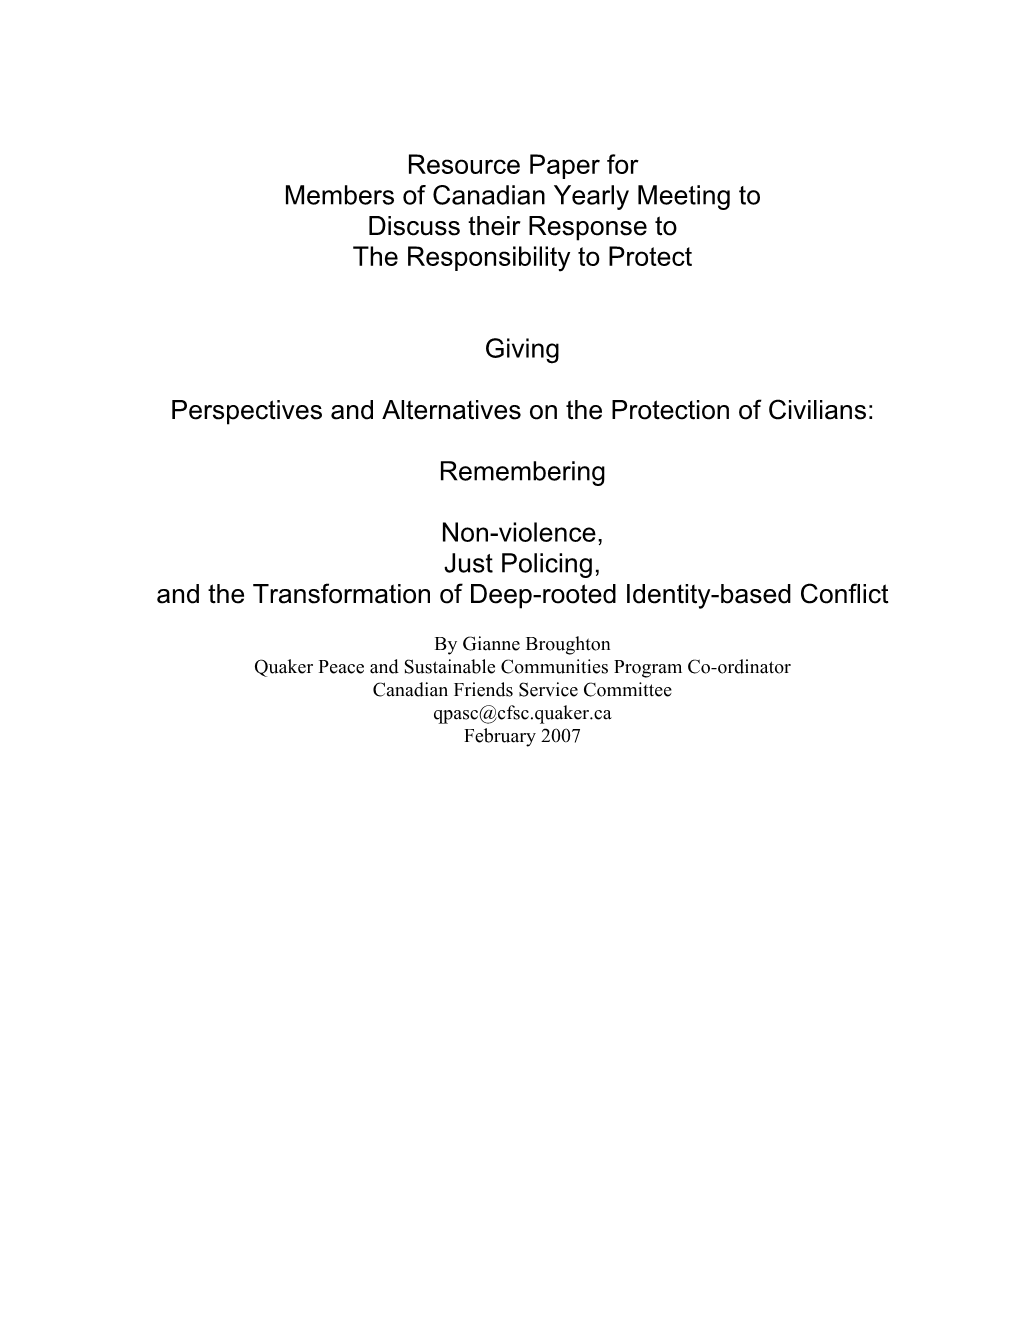 Resource Paper for Members of Canadian Yearly Meeting to Discuss Their Response to the Responsibility to Protect